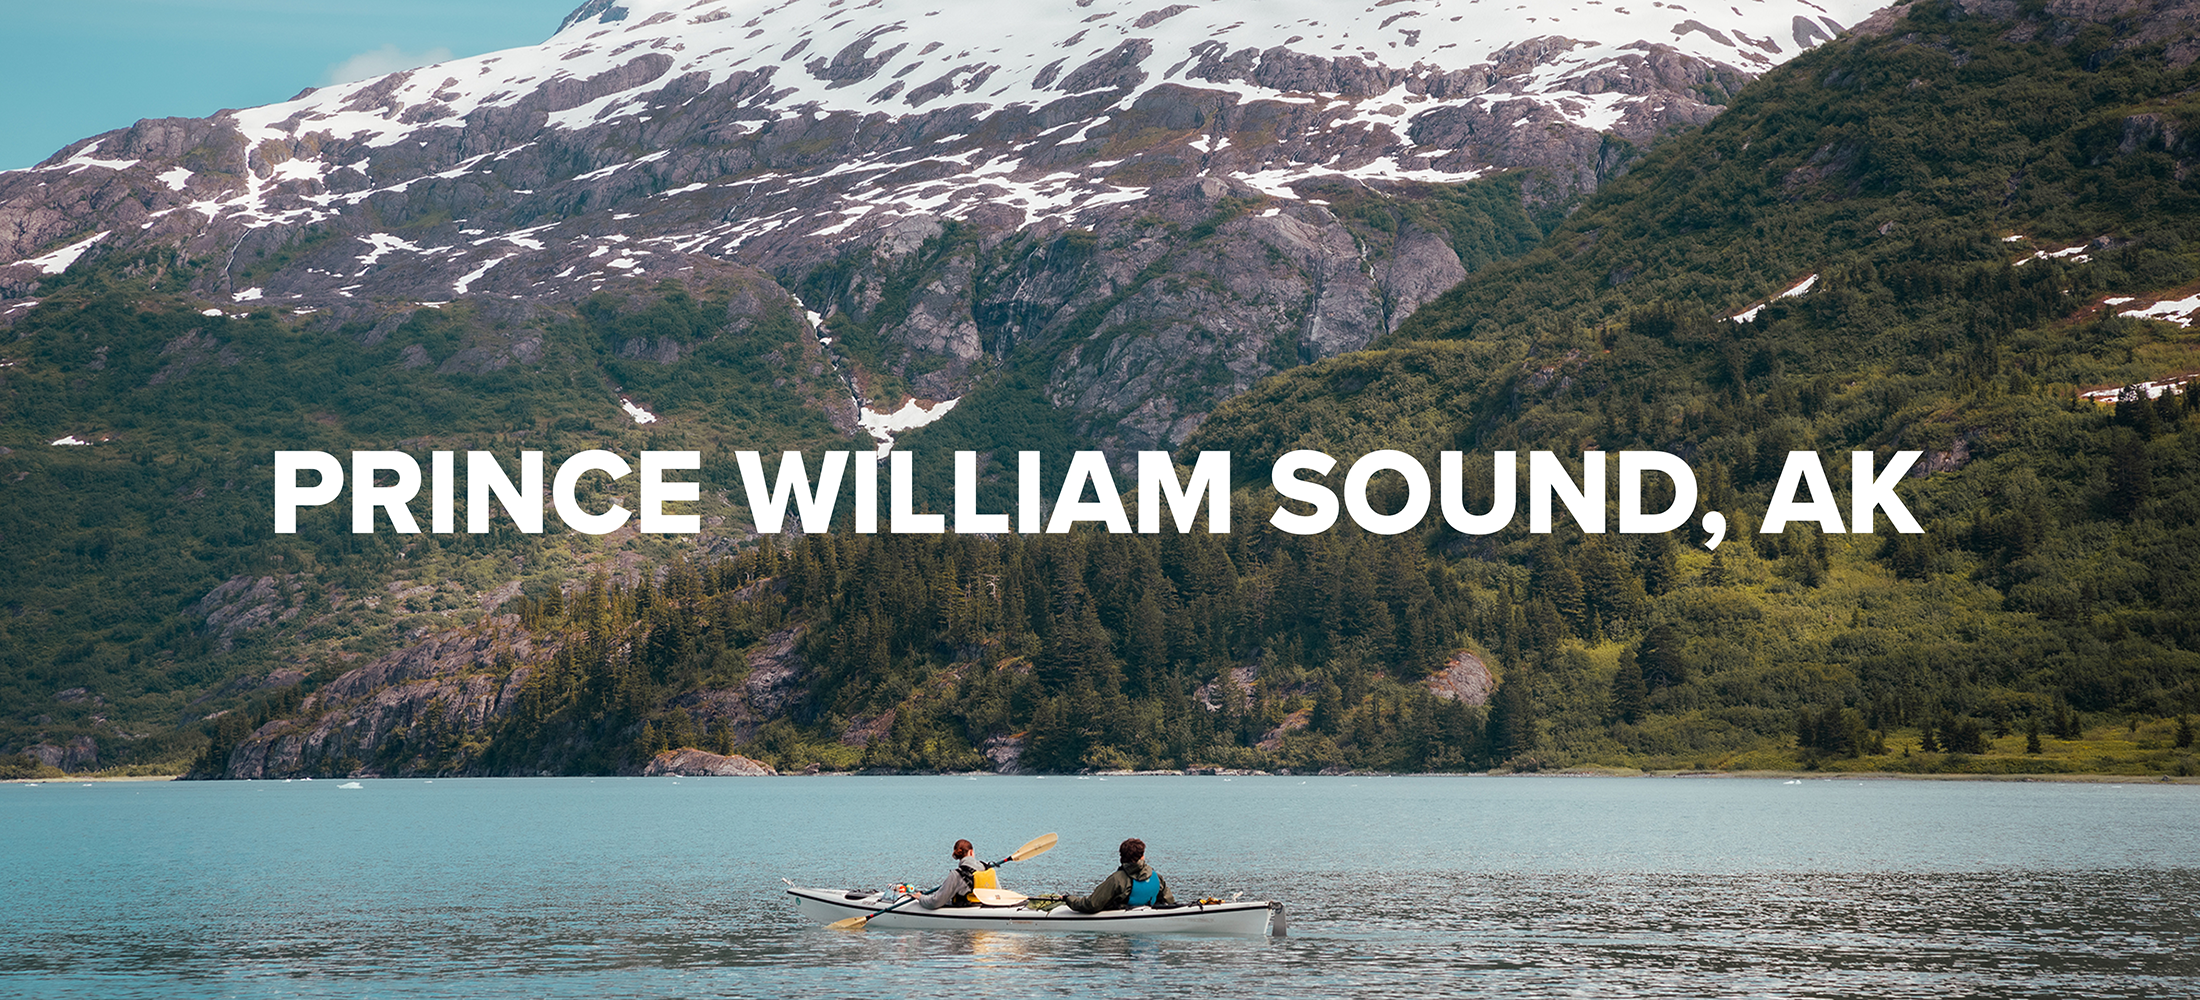 Two people sea kayaking in the Prince William Sound. 